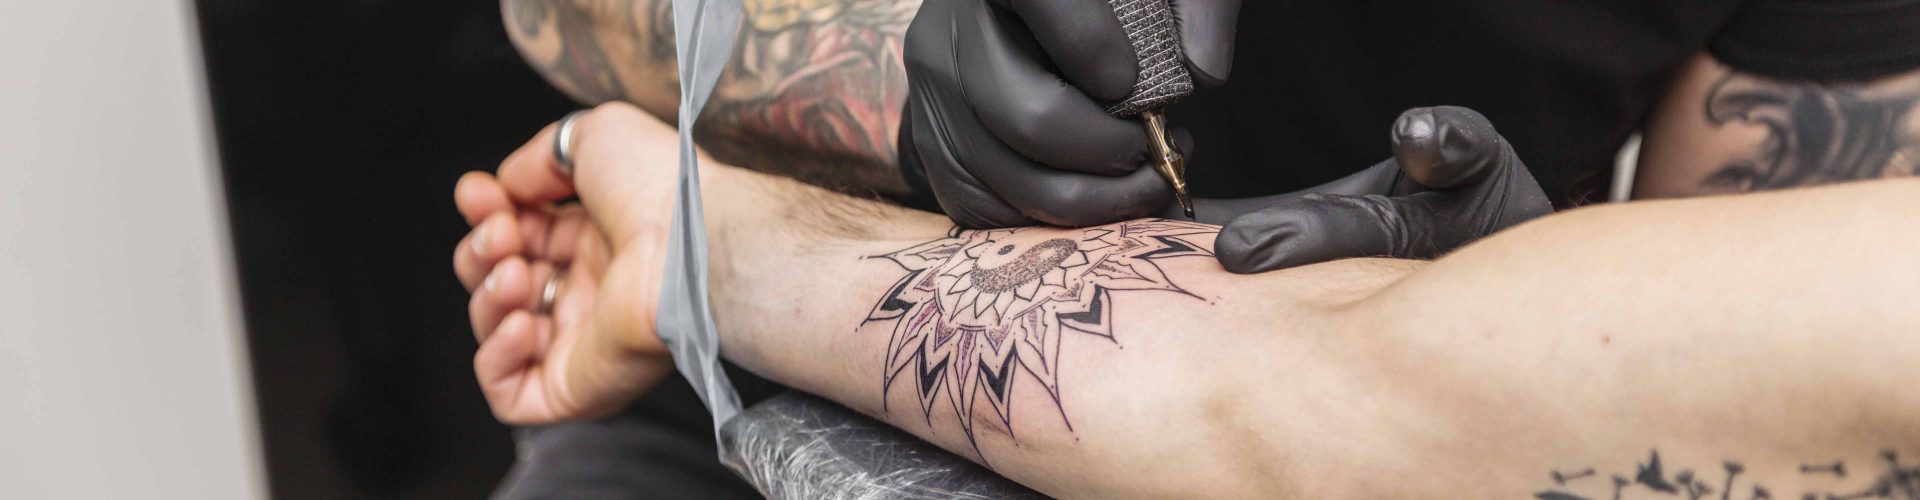 Tattoo master puts tattoo in form of flower on arm of another man